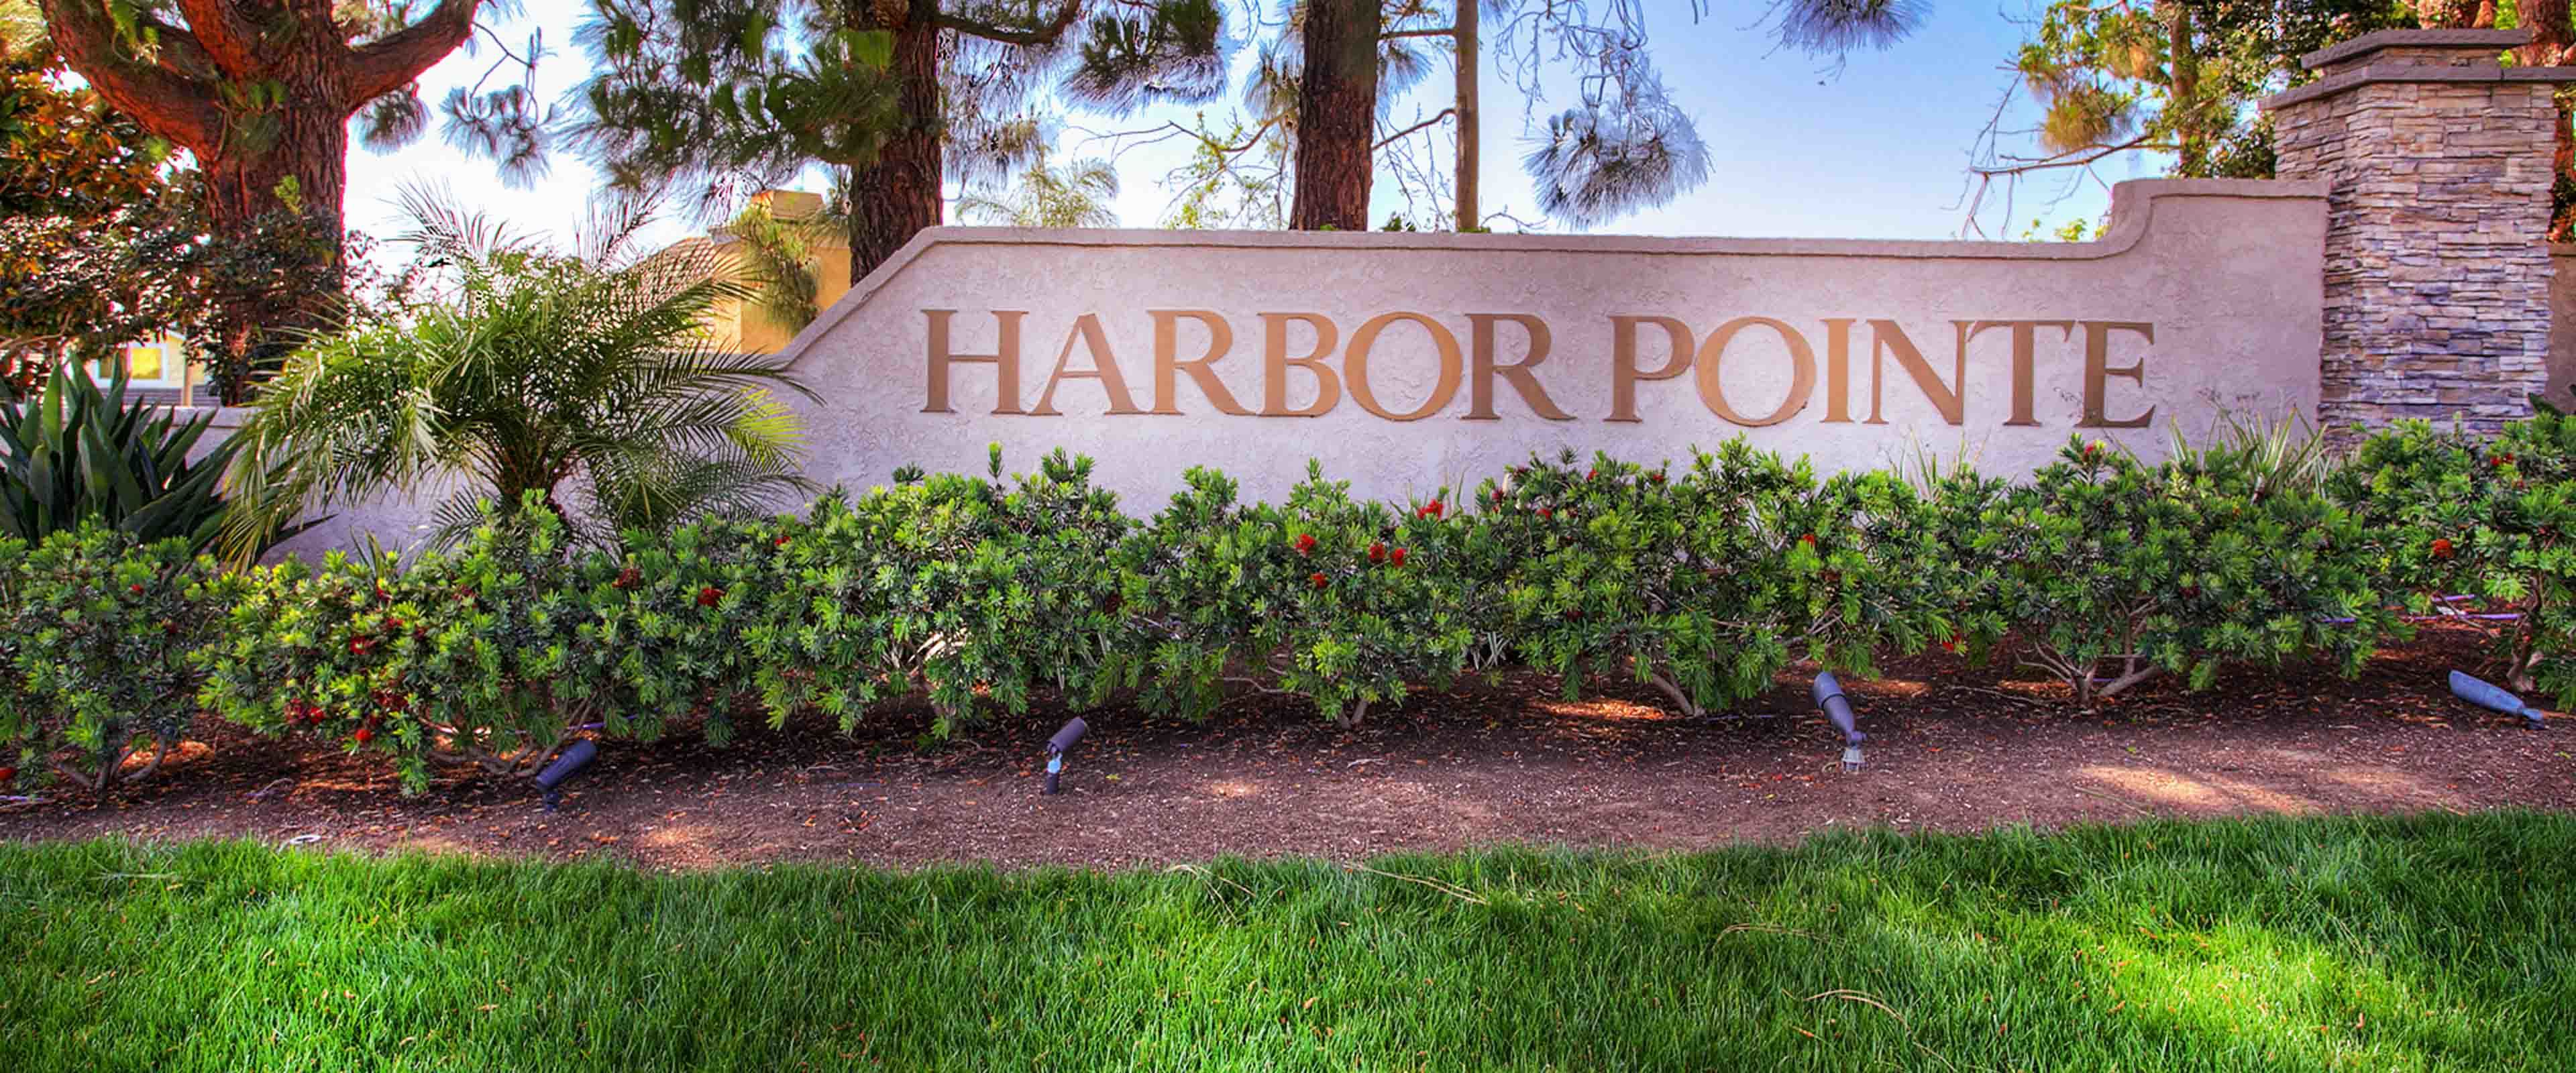 All Harbor Pointe homes currently for sale in Carlsbad, CA.  Also, additional information on community as well.